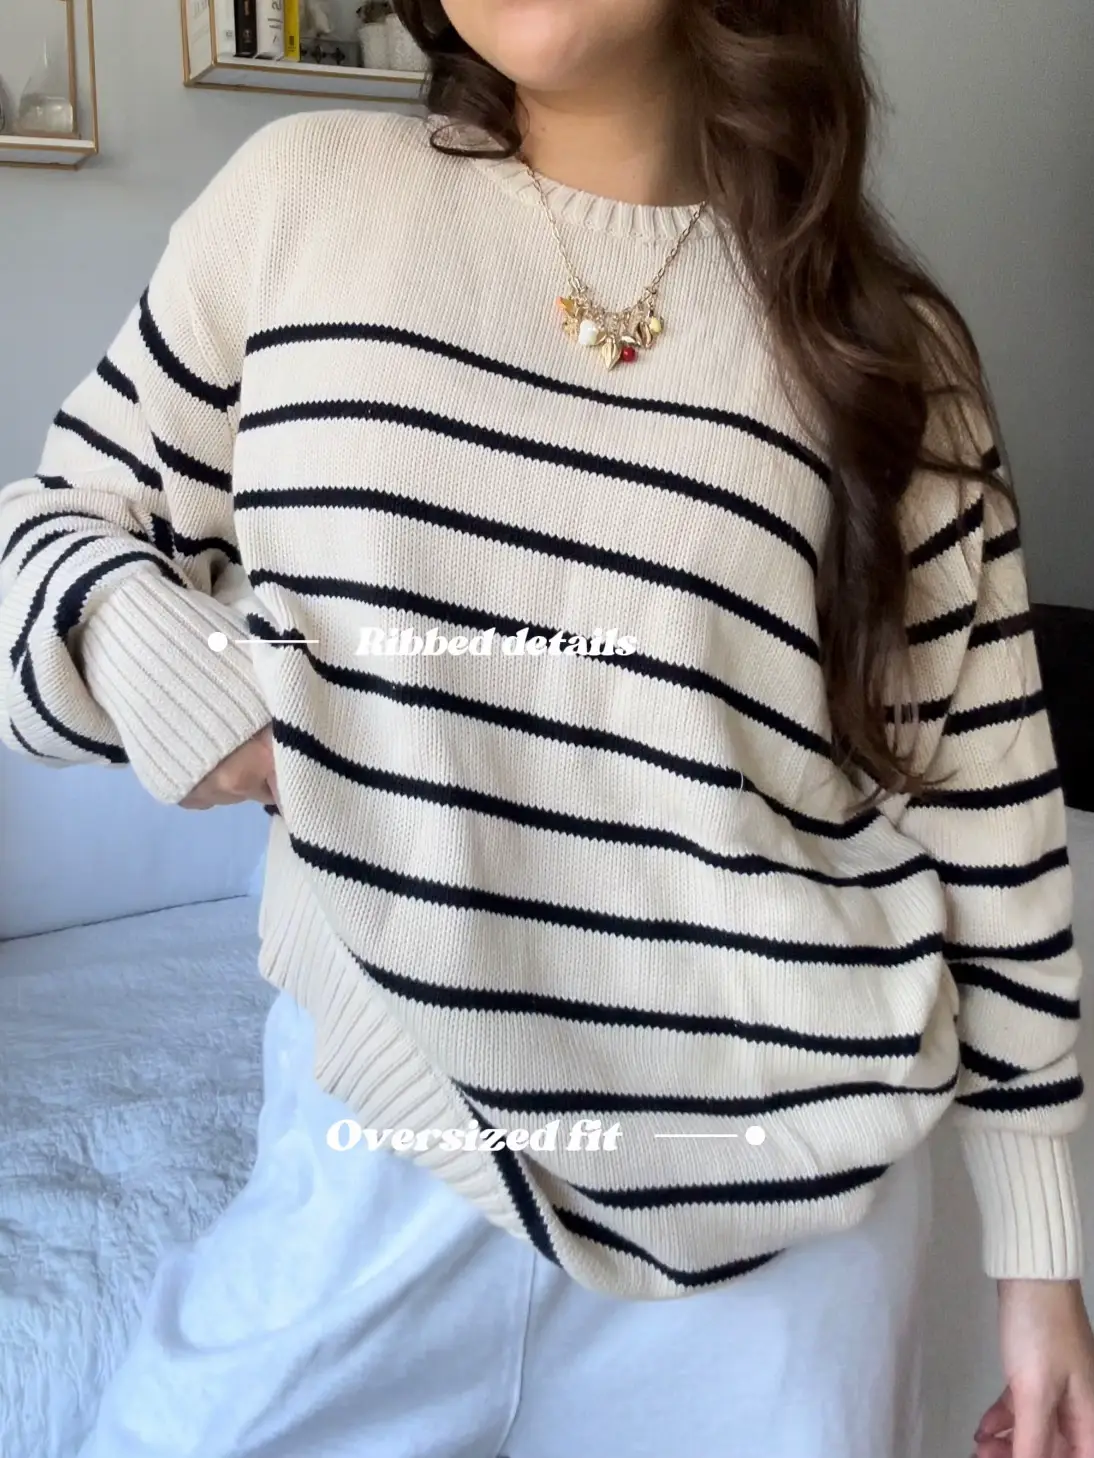 Brandy Melville Blue & White Striped Tank - $13 (50% Off Retail) - From  lexie